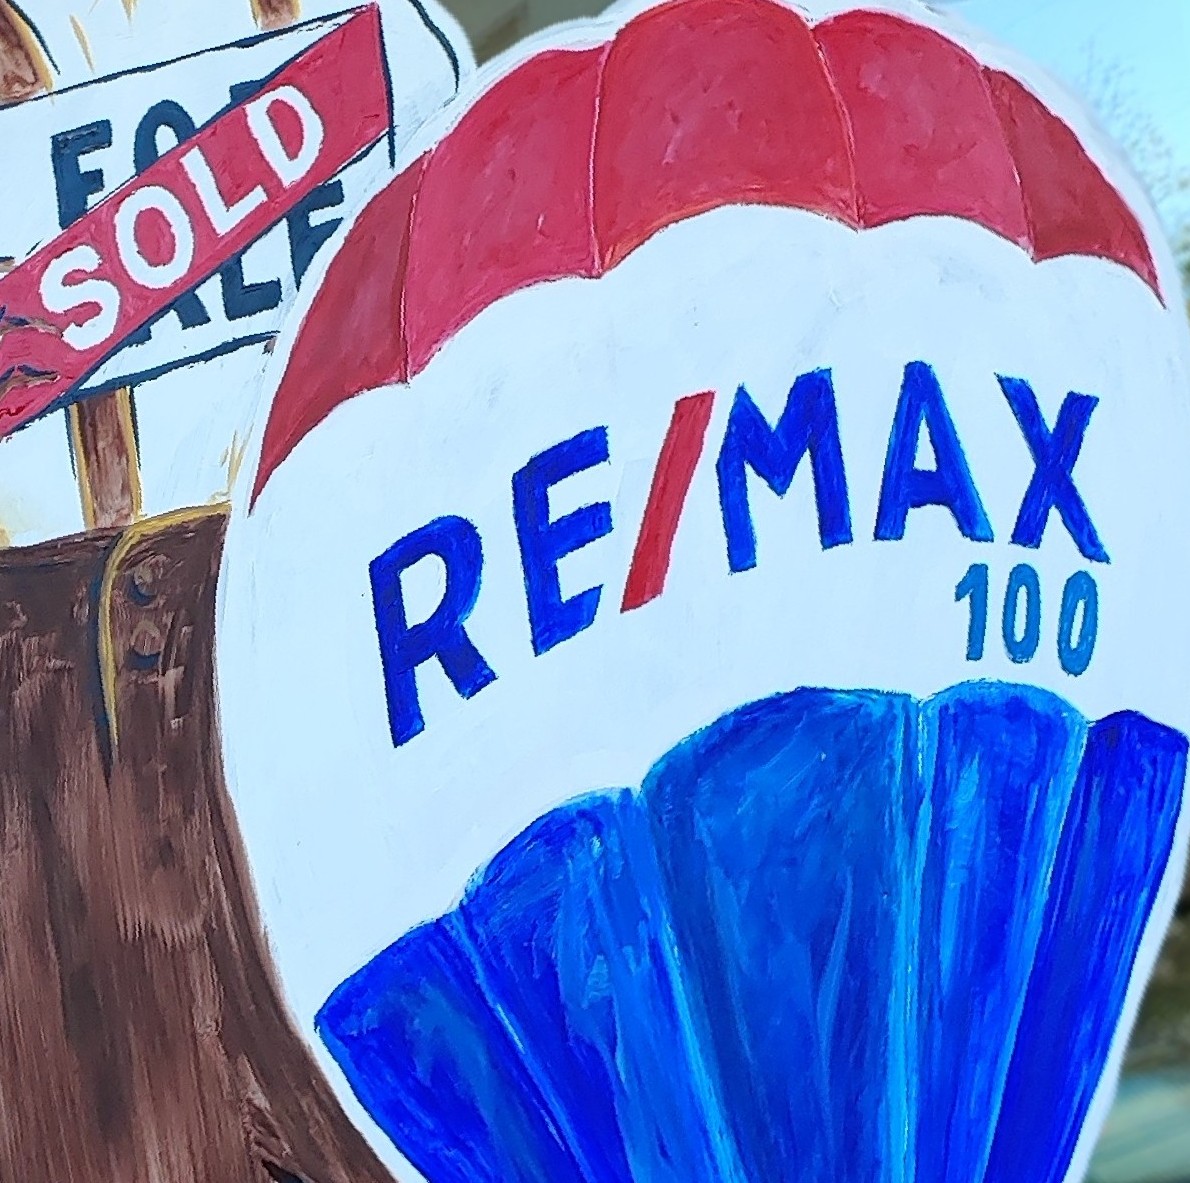 Beverly Moody Remax 100